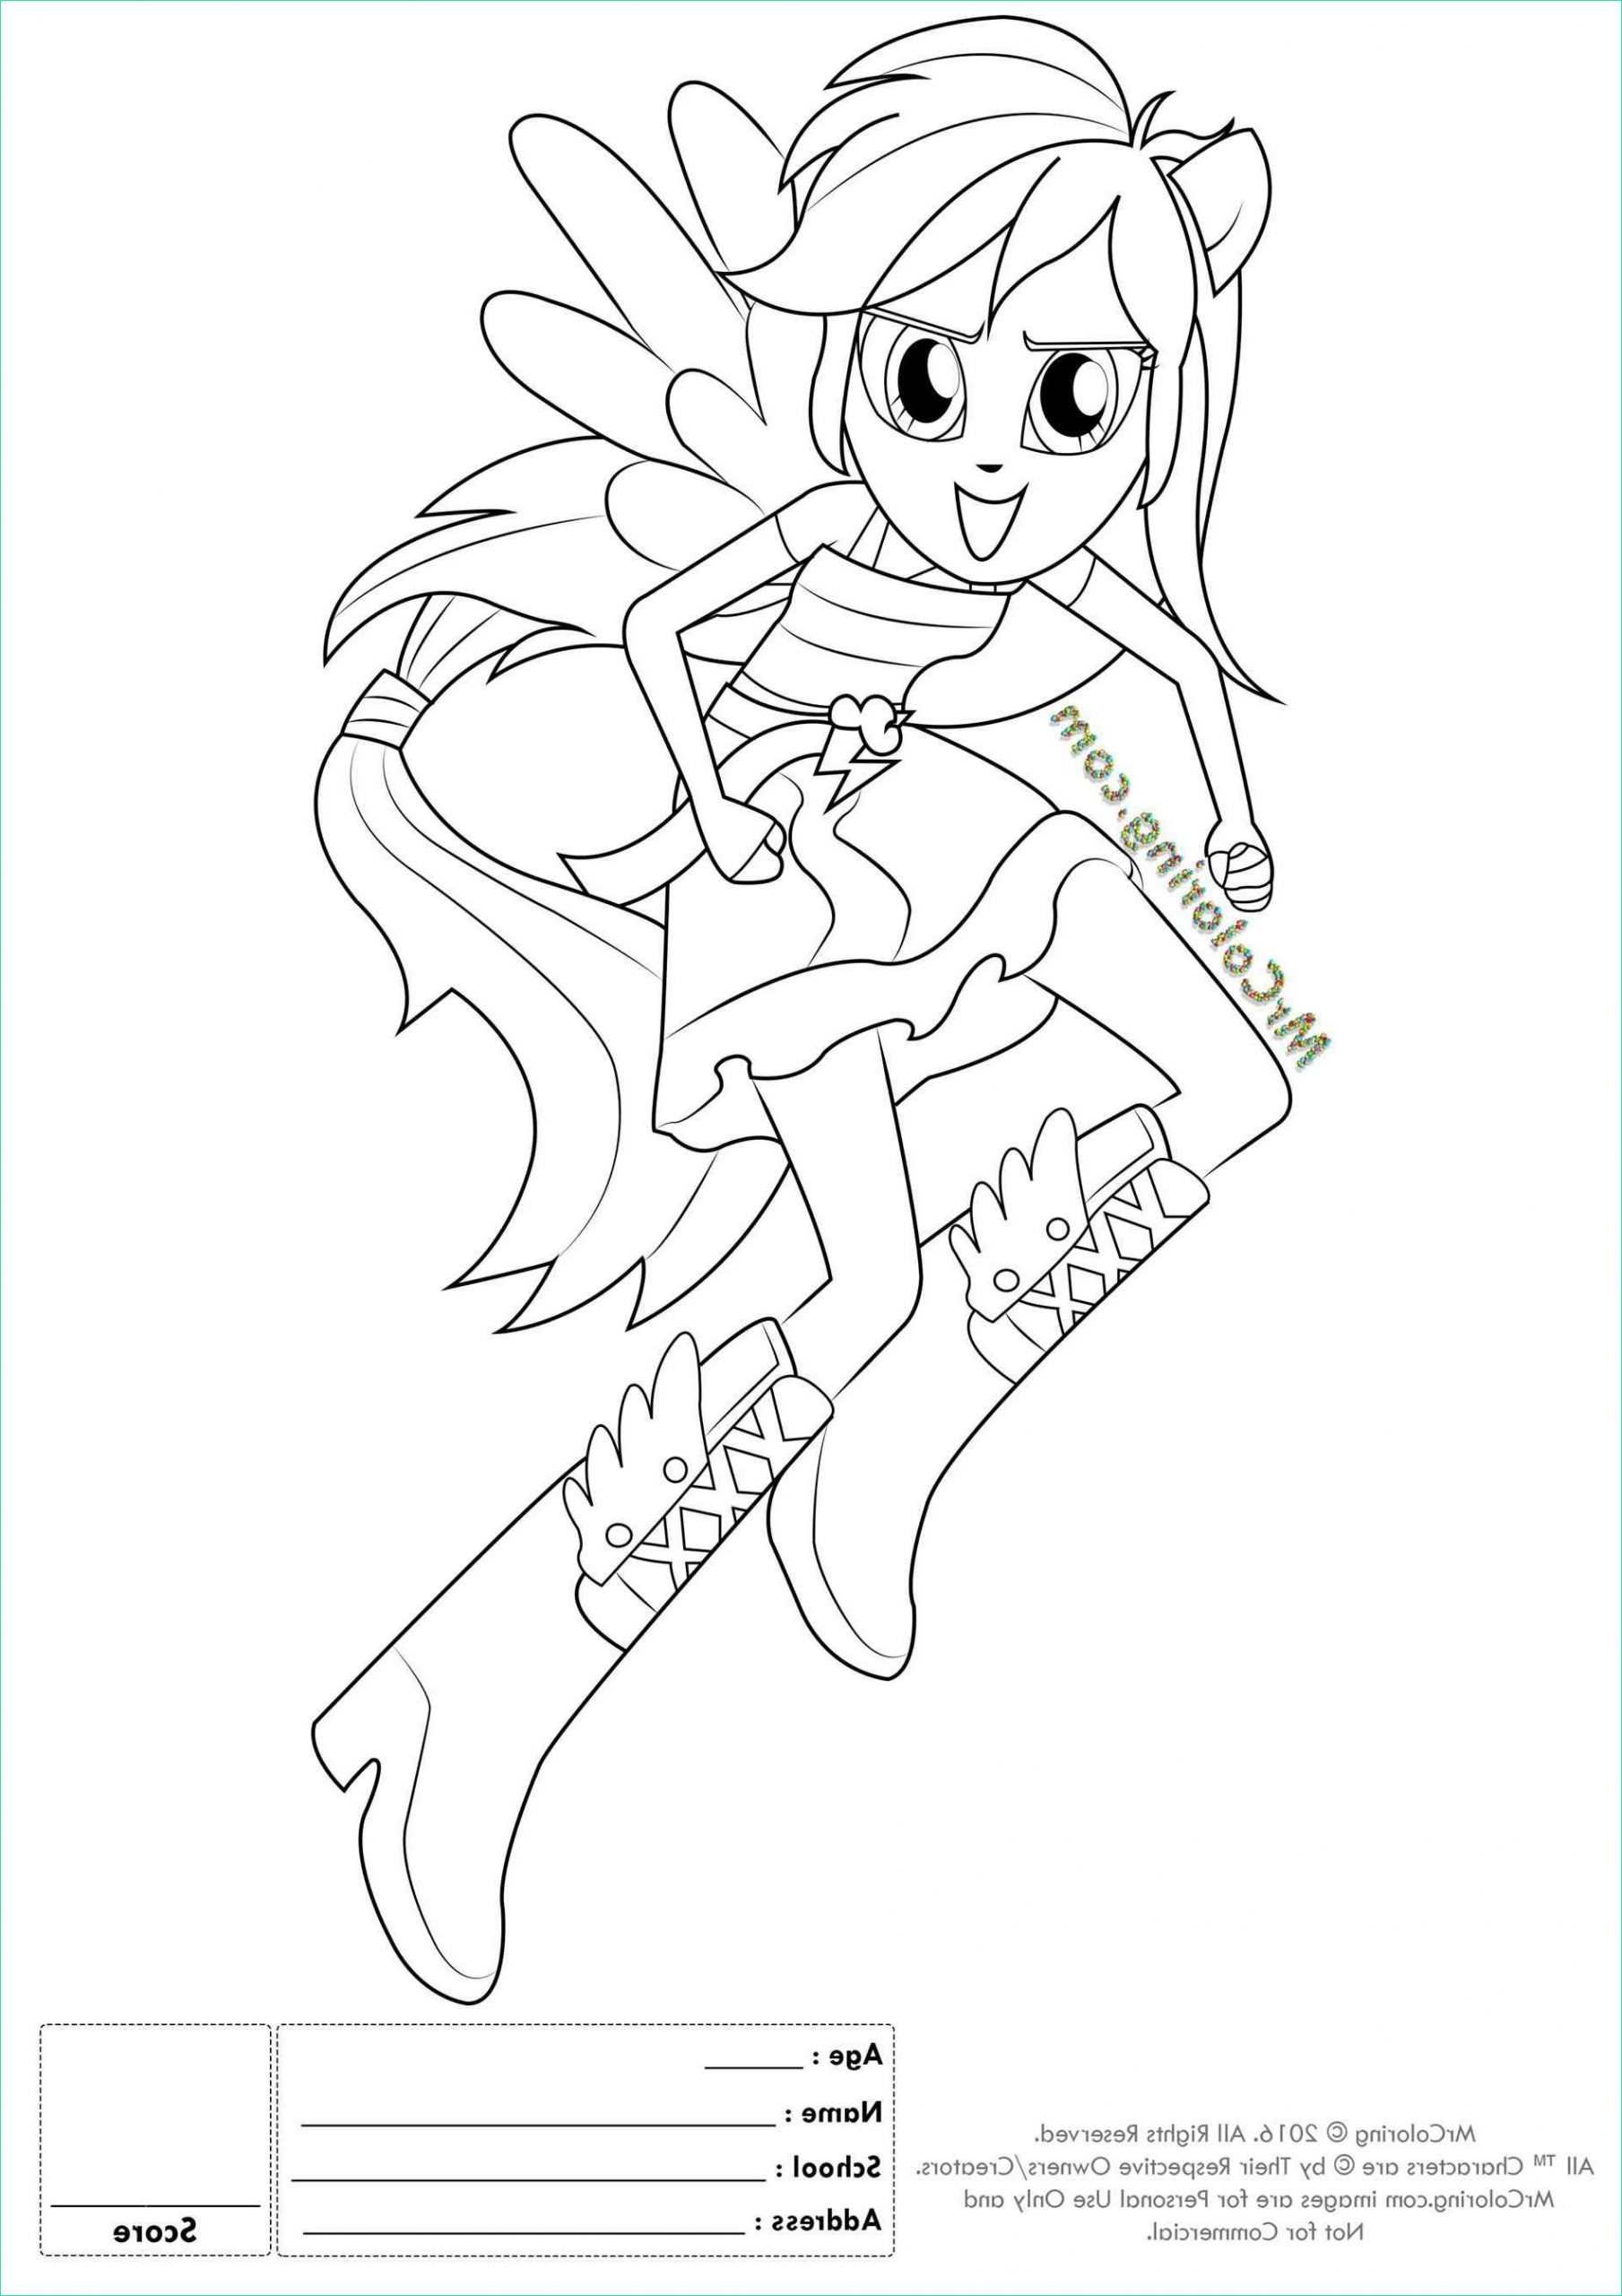 Coloriage My Little Pony Equestria Impressionnant Stock Equestria Girl Coloring Pages to Print at Getdrawings